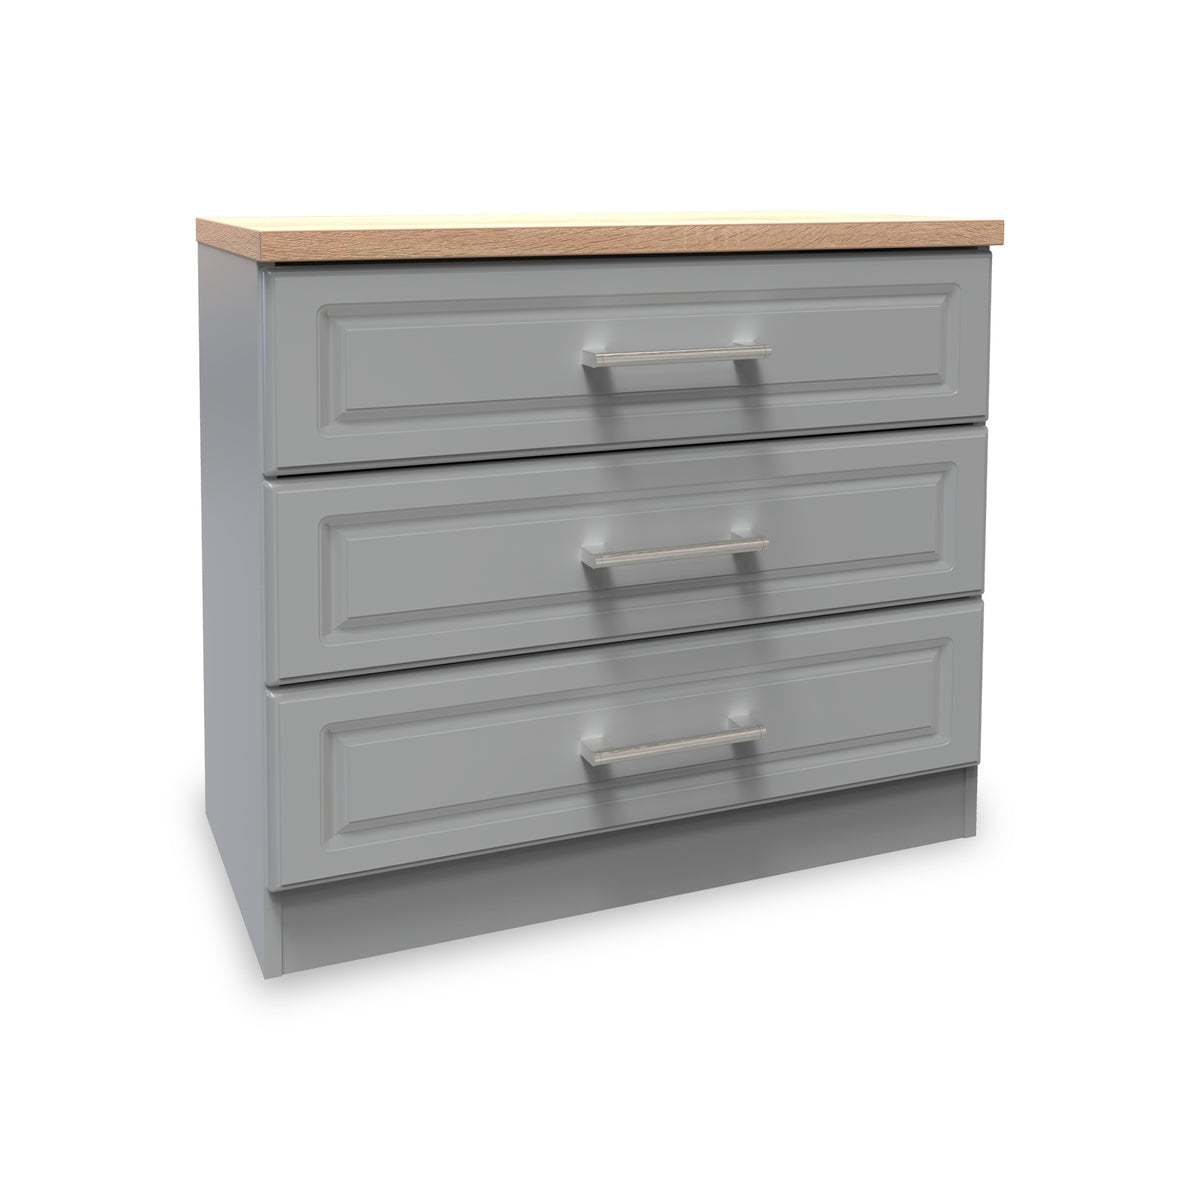 Talland Grey 3 Drawer Chest by Roseland Furniture